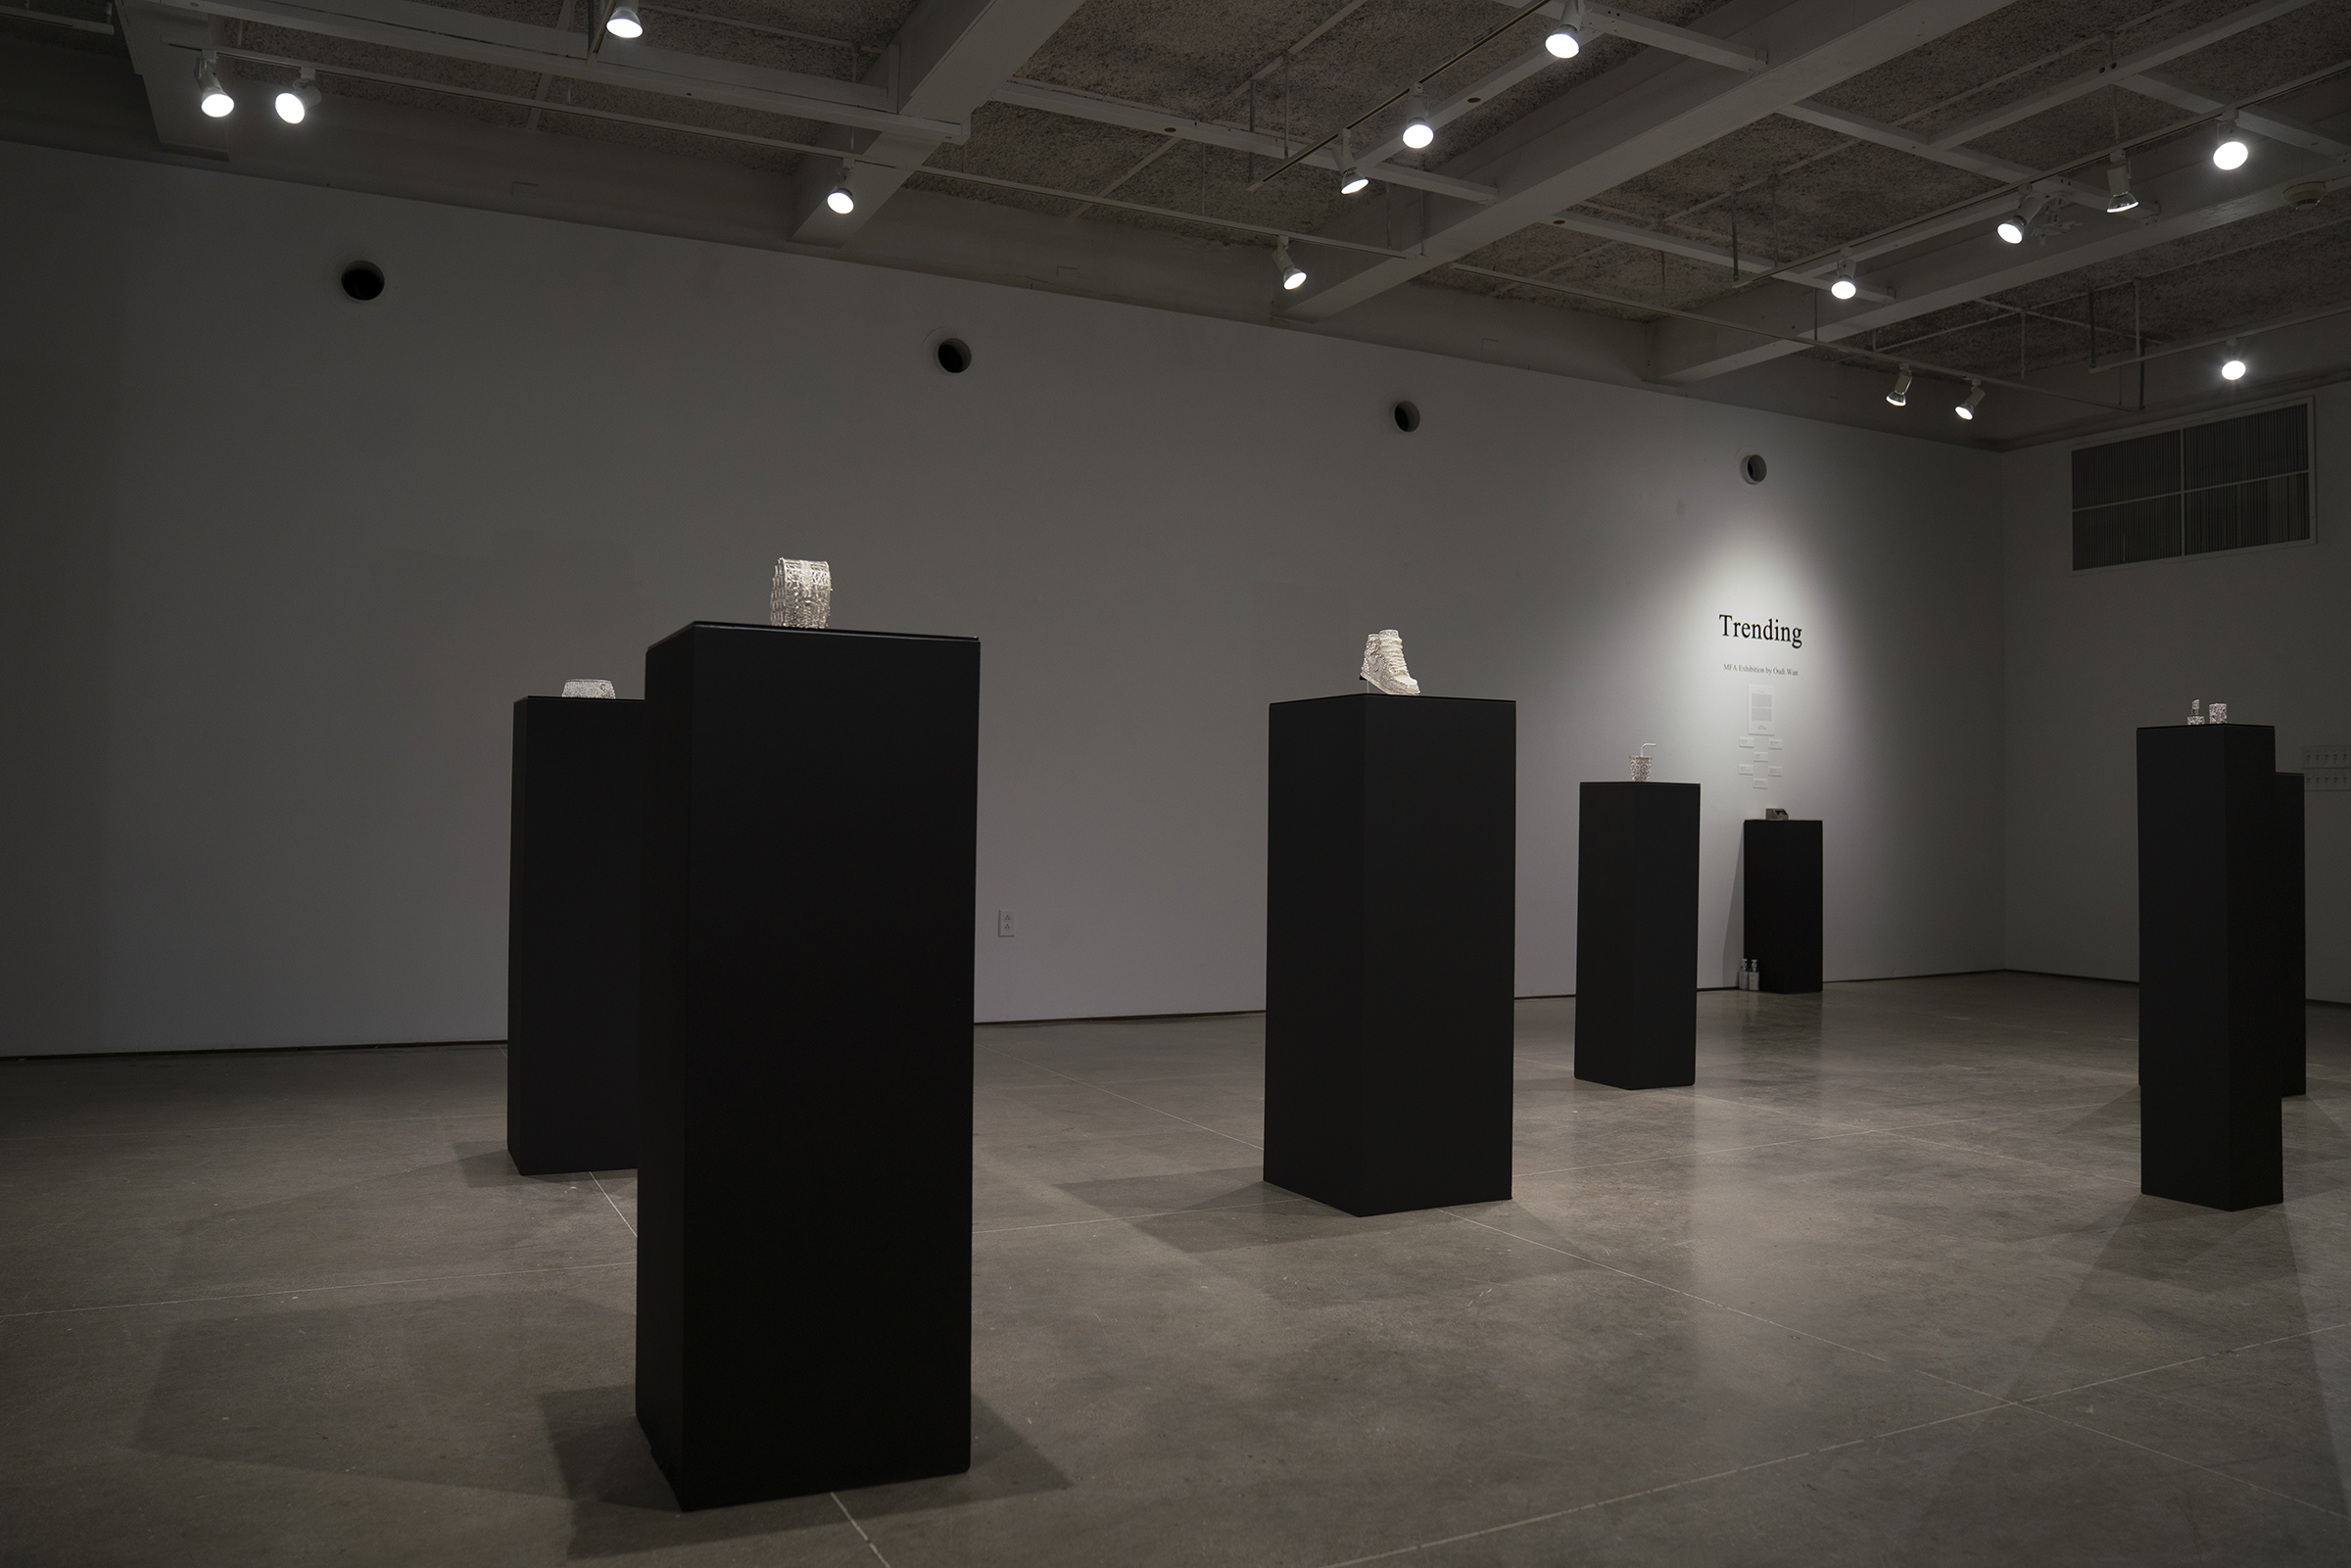 Installation view of Trending Master of Fine Arts Exhibition by Oudi Wan at Gallery 7, Humanities Building, University of Wisconsin-Madison.